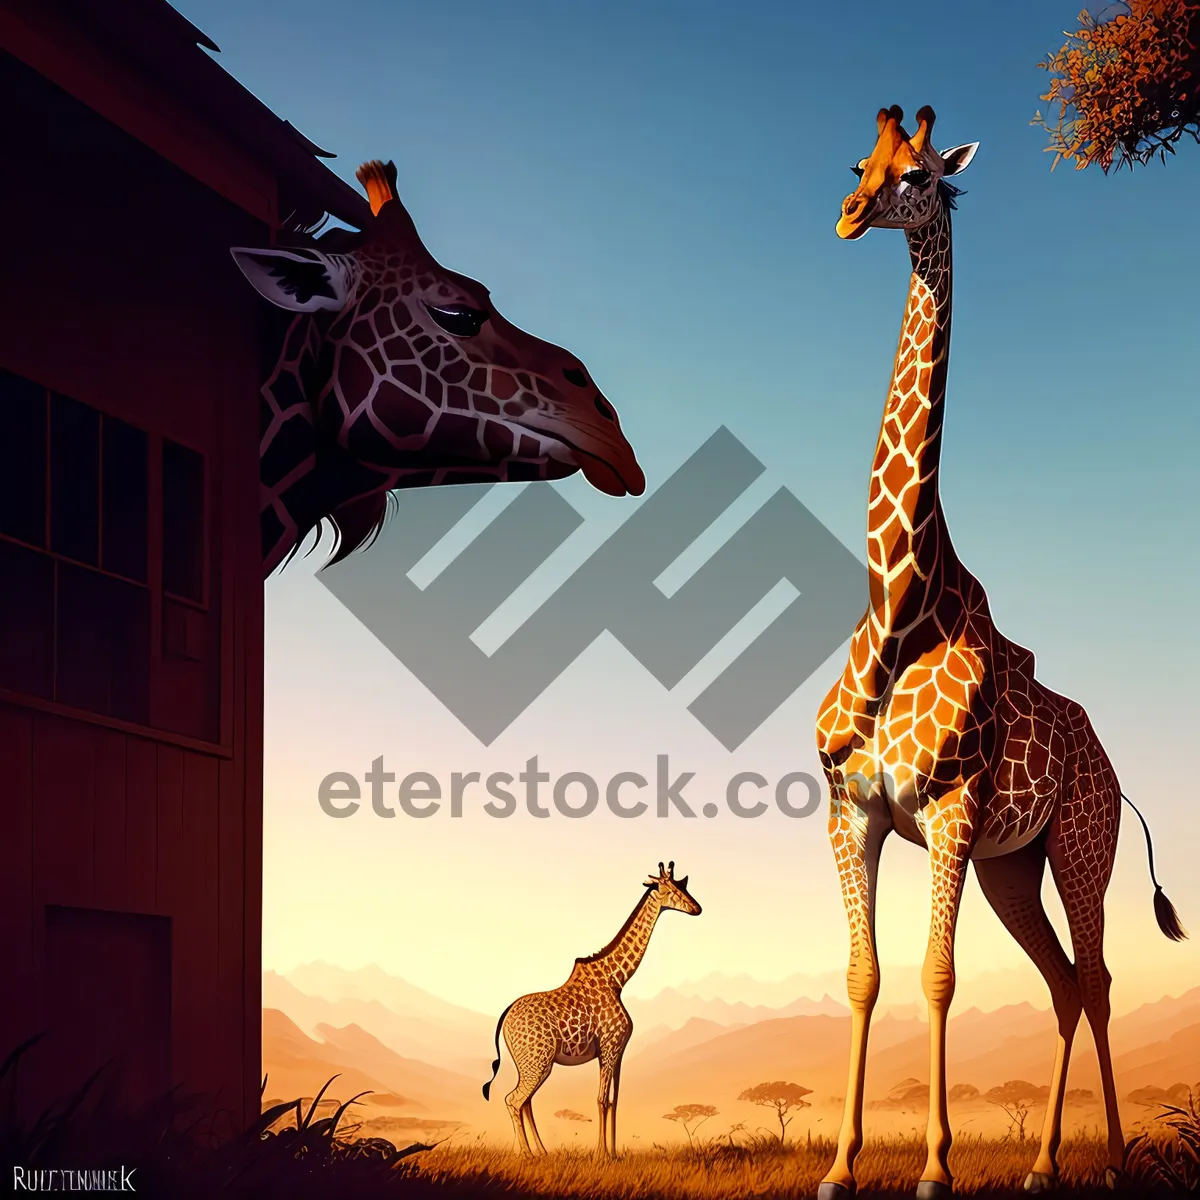 Picture of Majestic Giraffe in the Wild Safari"
"Graceful Giraffe in the National Park"
"Wilderness Encounter: Giraffe in the Desert"
"Giraffe in its Natural Habitat: Tall and Beautiful"
"Giraffe at the Zoo: A Sky-High Experience